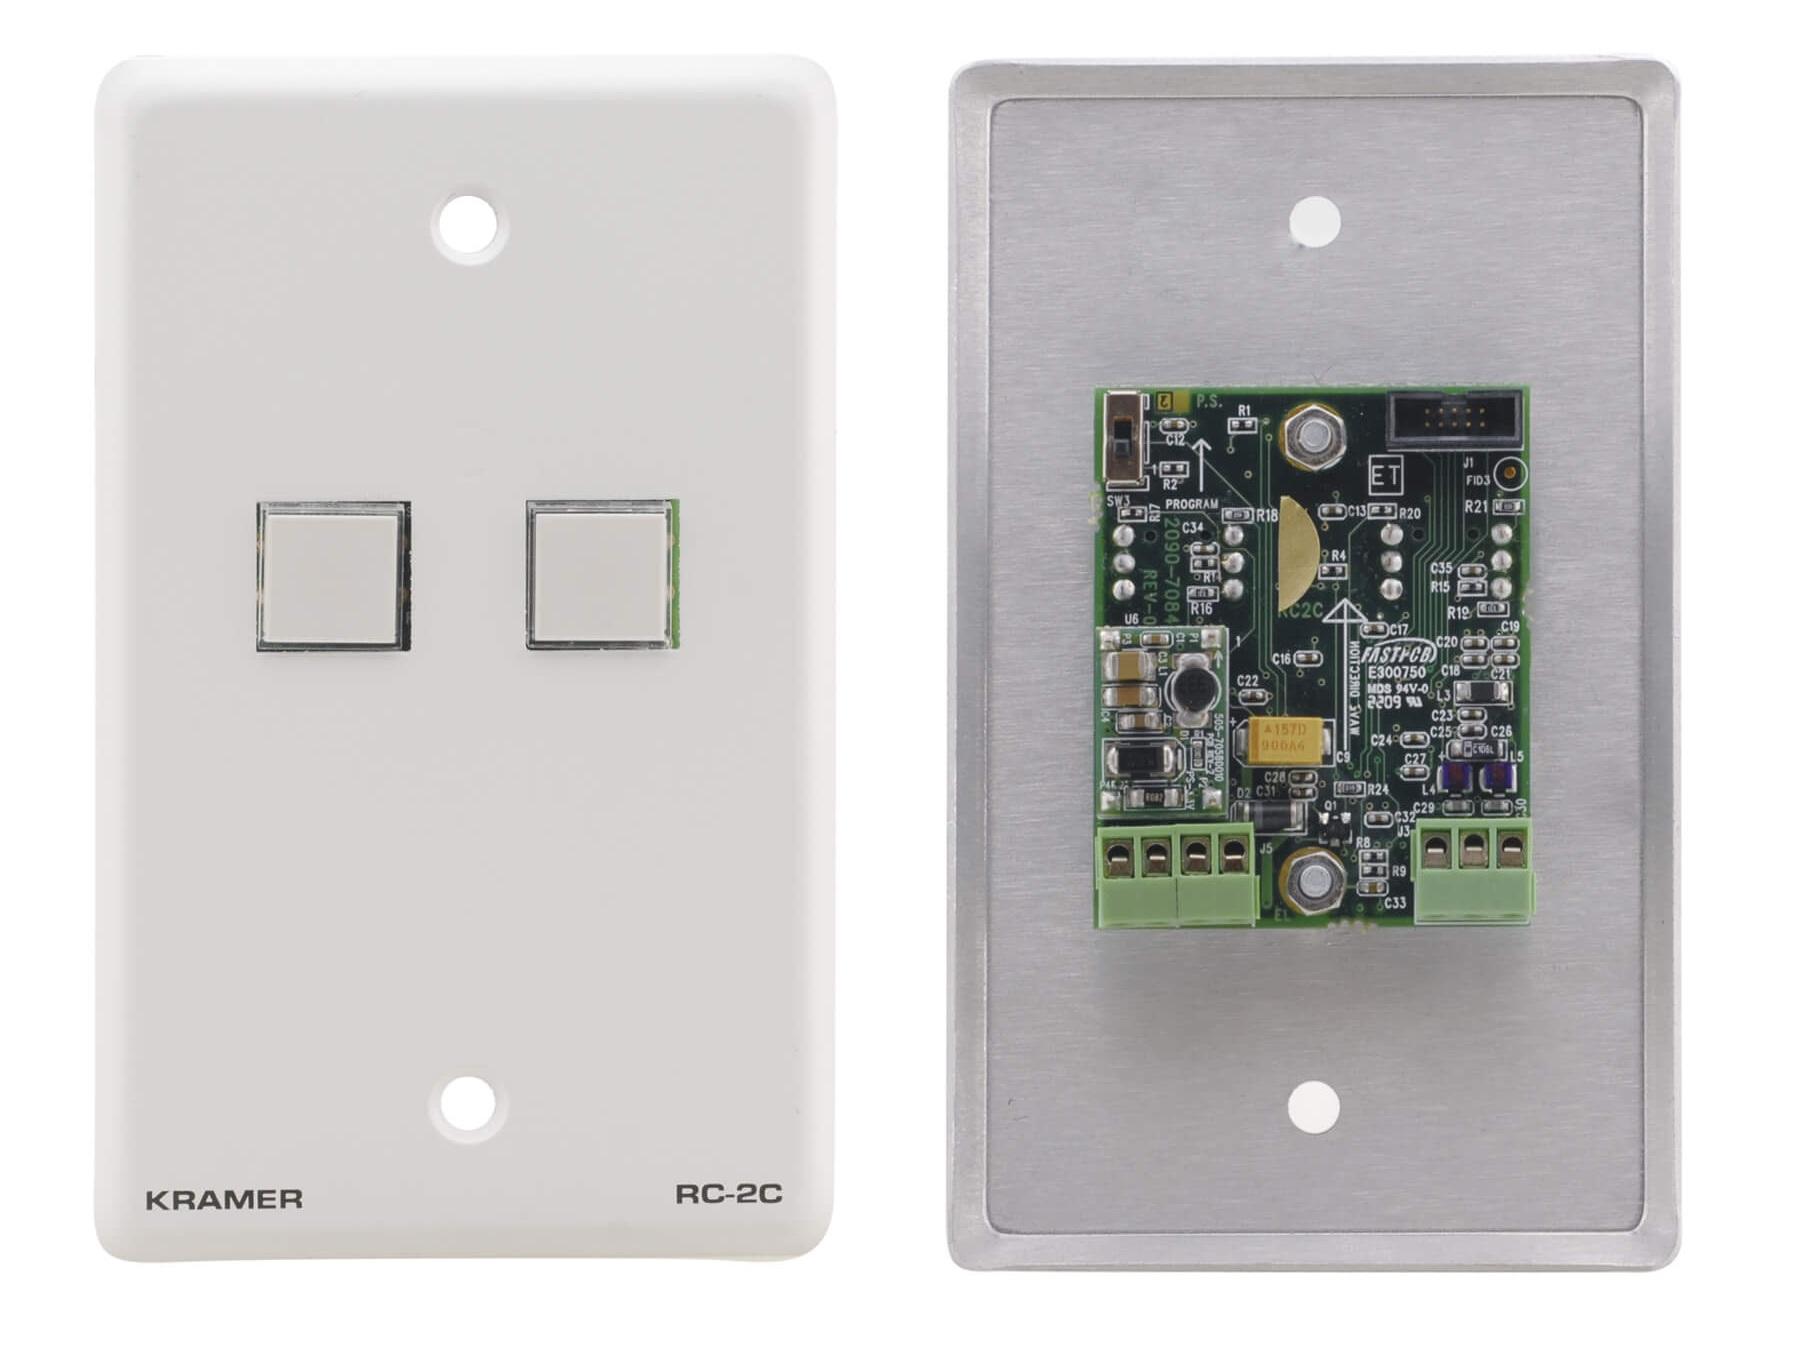 RC-2C(W) Wall Plate - RS-232 and IR Controller - White by Kramer